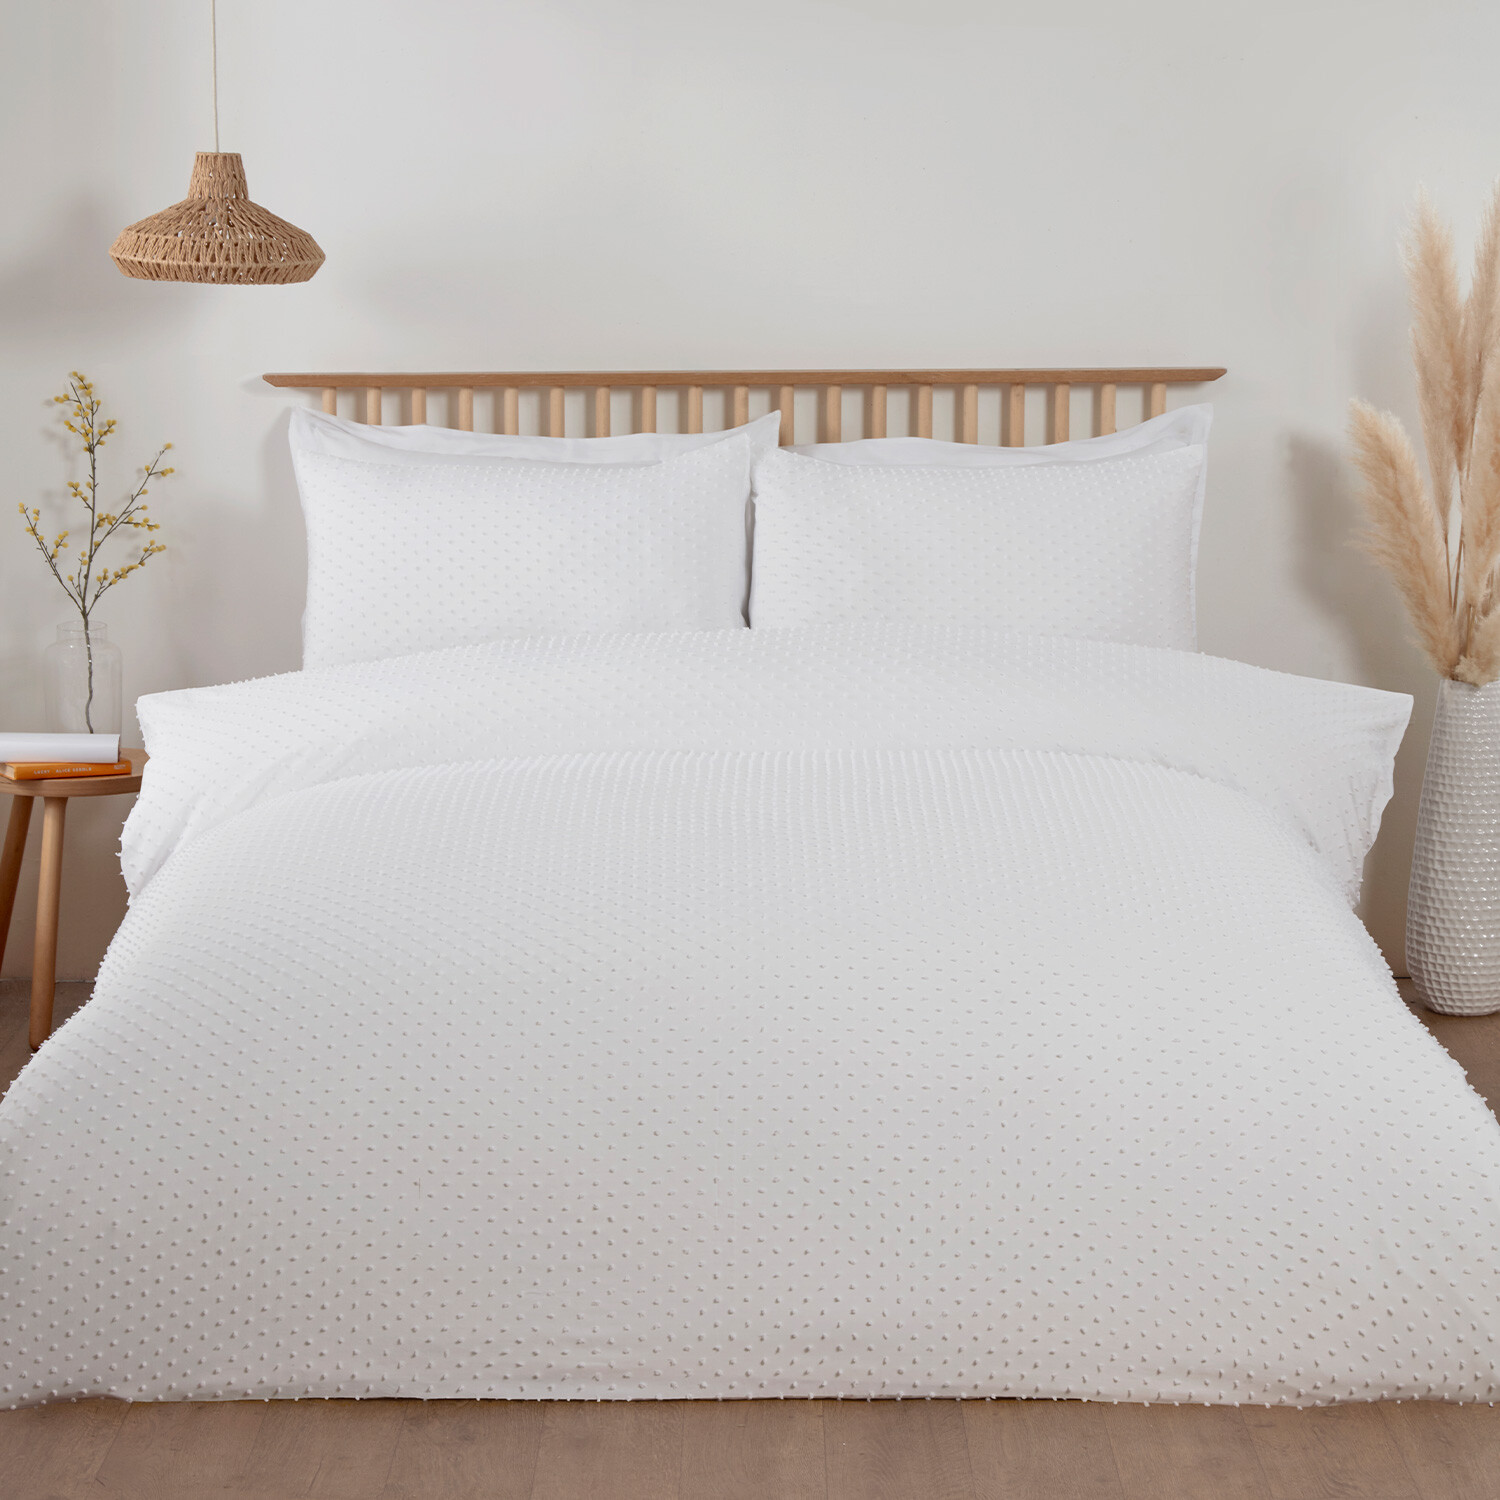 Sienna Tufted Dot Duvet Cover and Pillowcase Set - White / Double Image 1